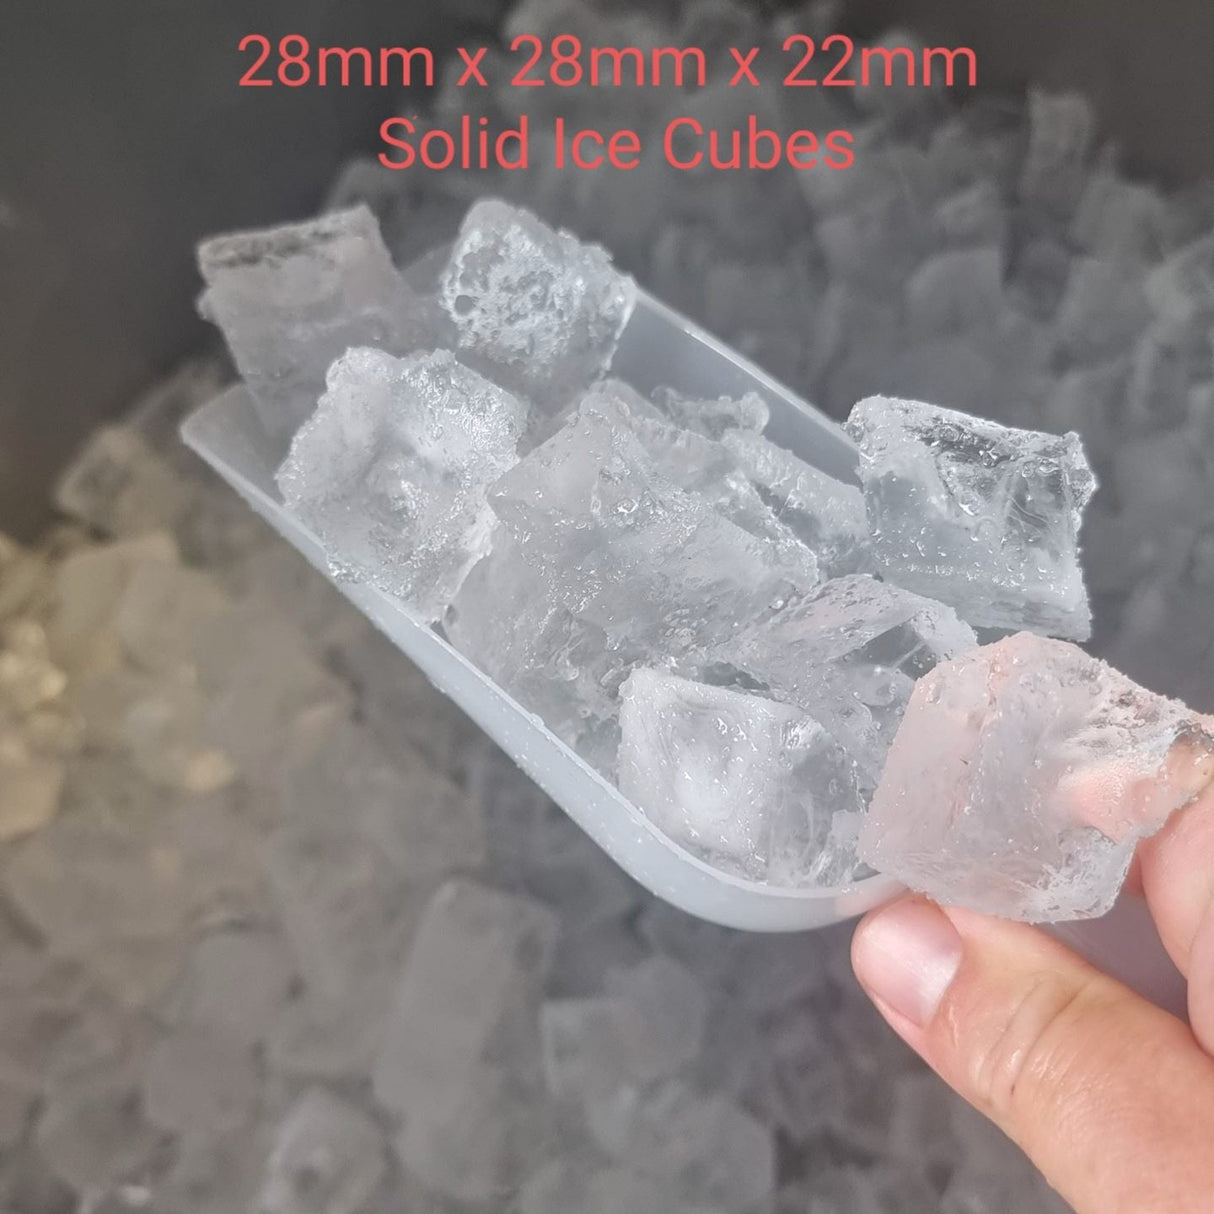 Shot of ice cubes the ICEPRO 55kg/24hr Cube Ice Maker Machine produces.